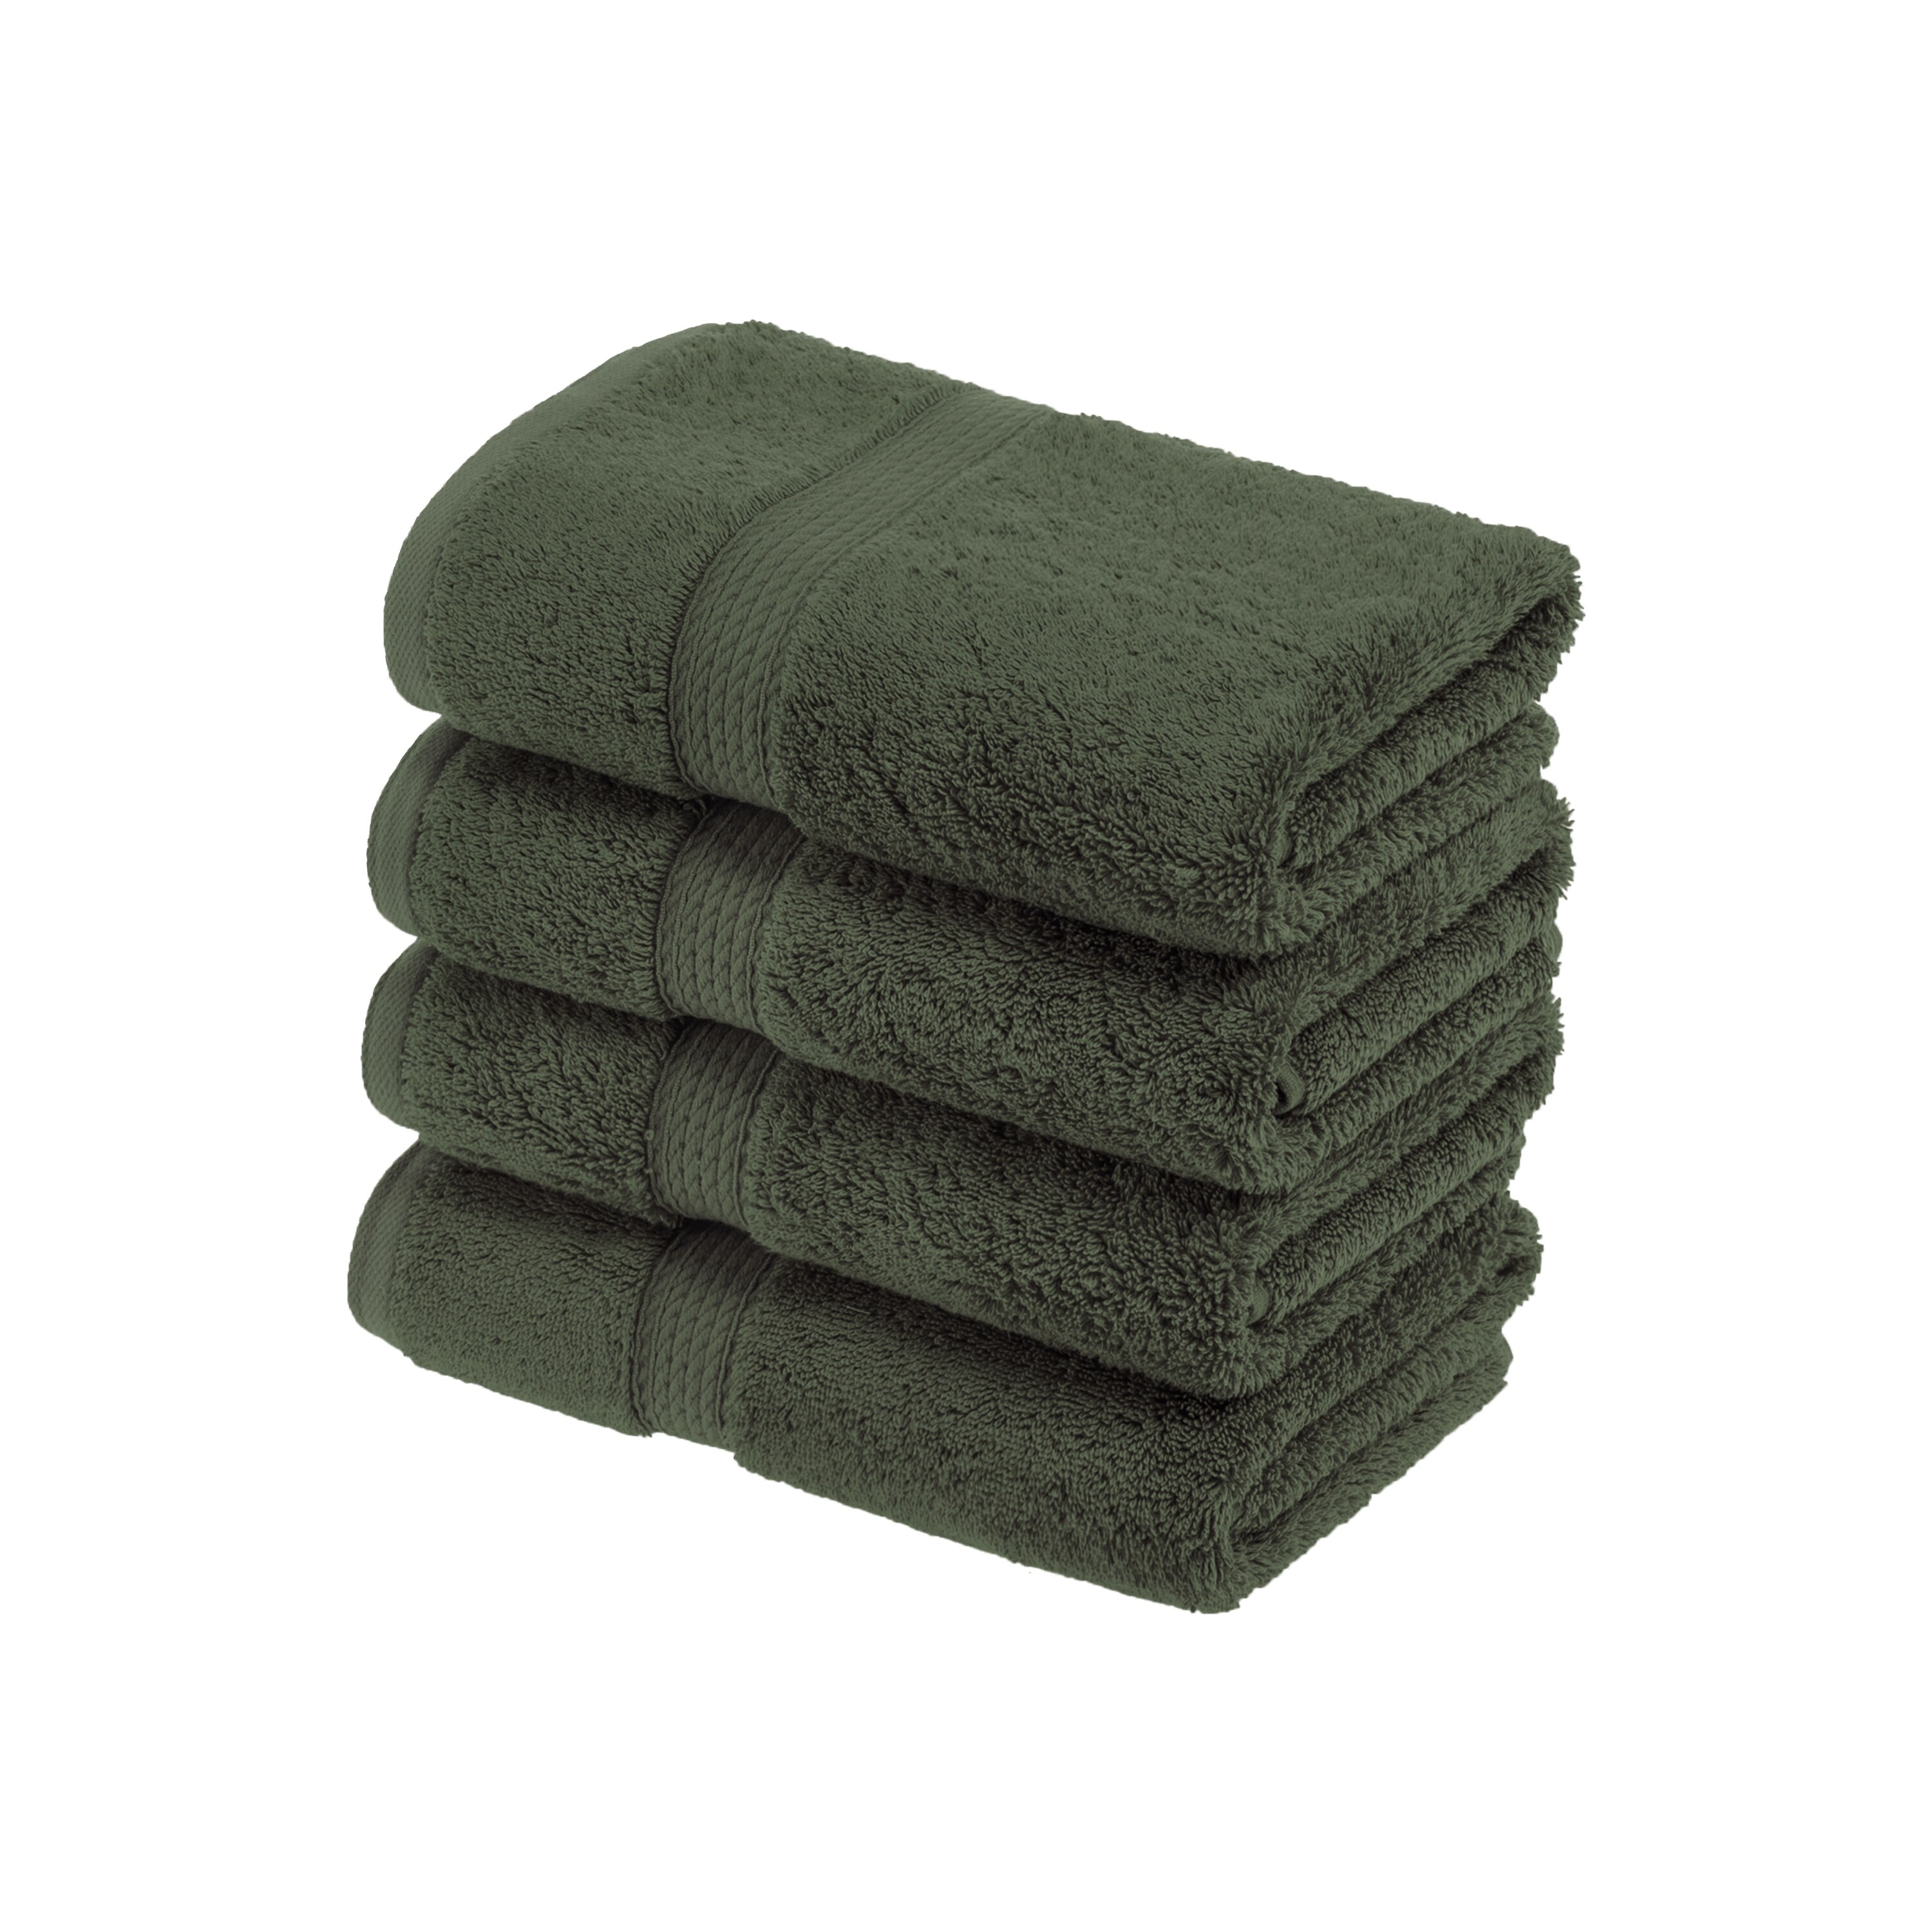 Purly Indulgent Egyptian Cotton Hand Wash Cloths Towels Set 4 PIECE Hedge  Green 